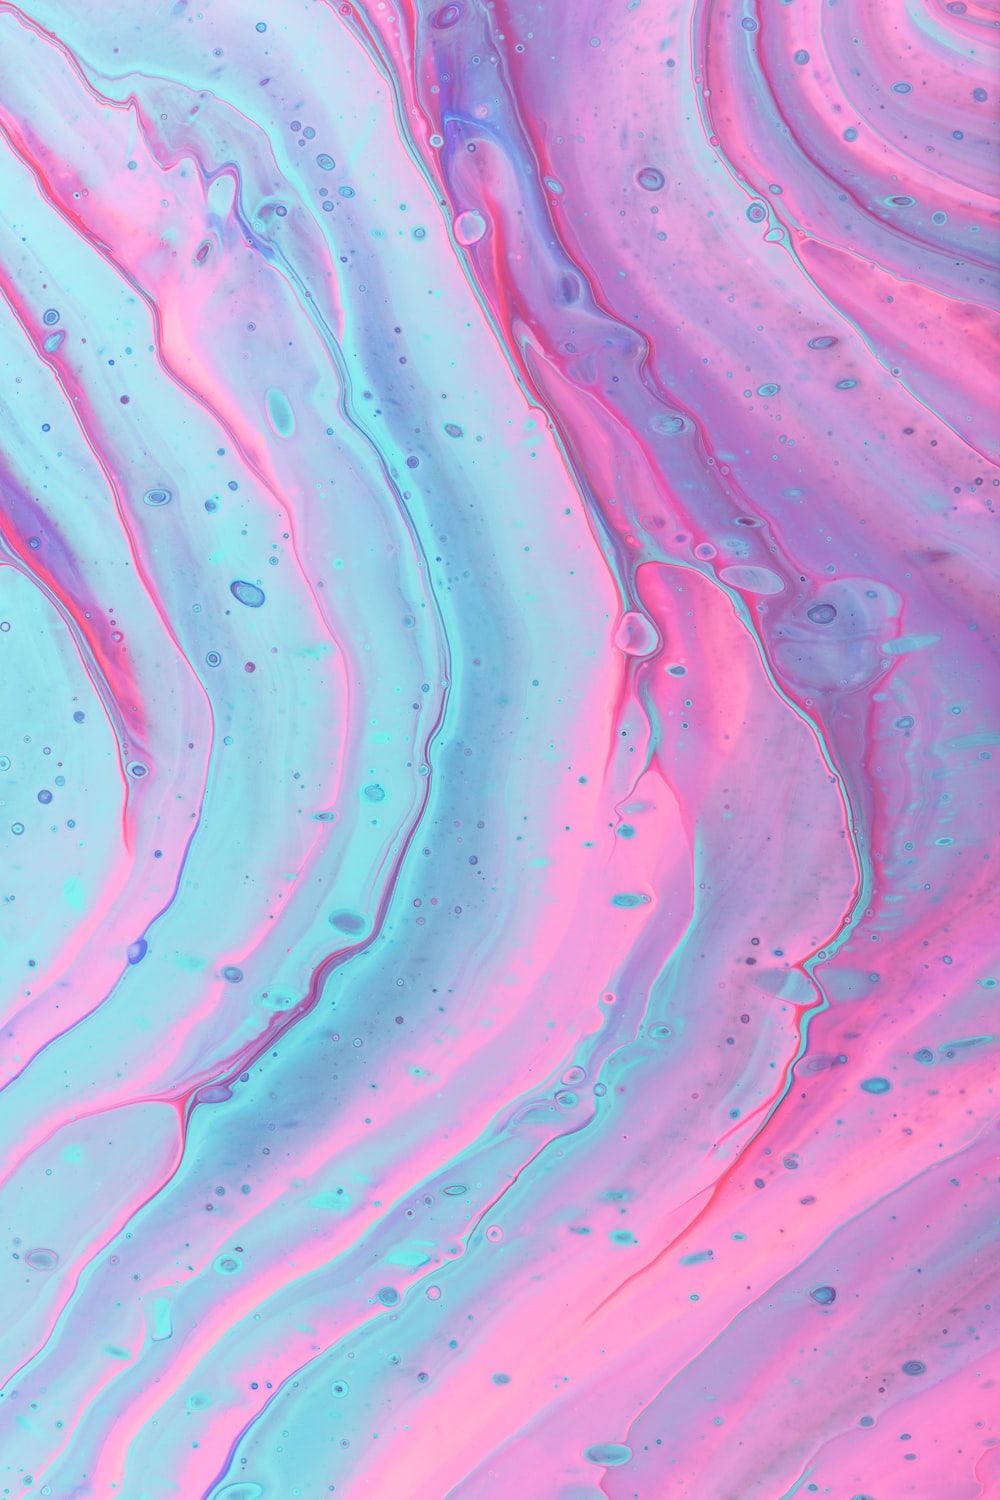 A close up of some blue and pink liquid - Candy, mermaid